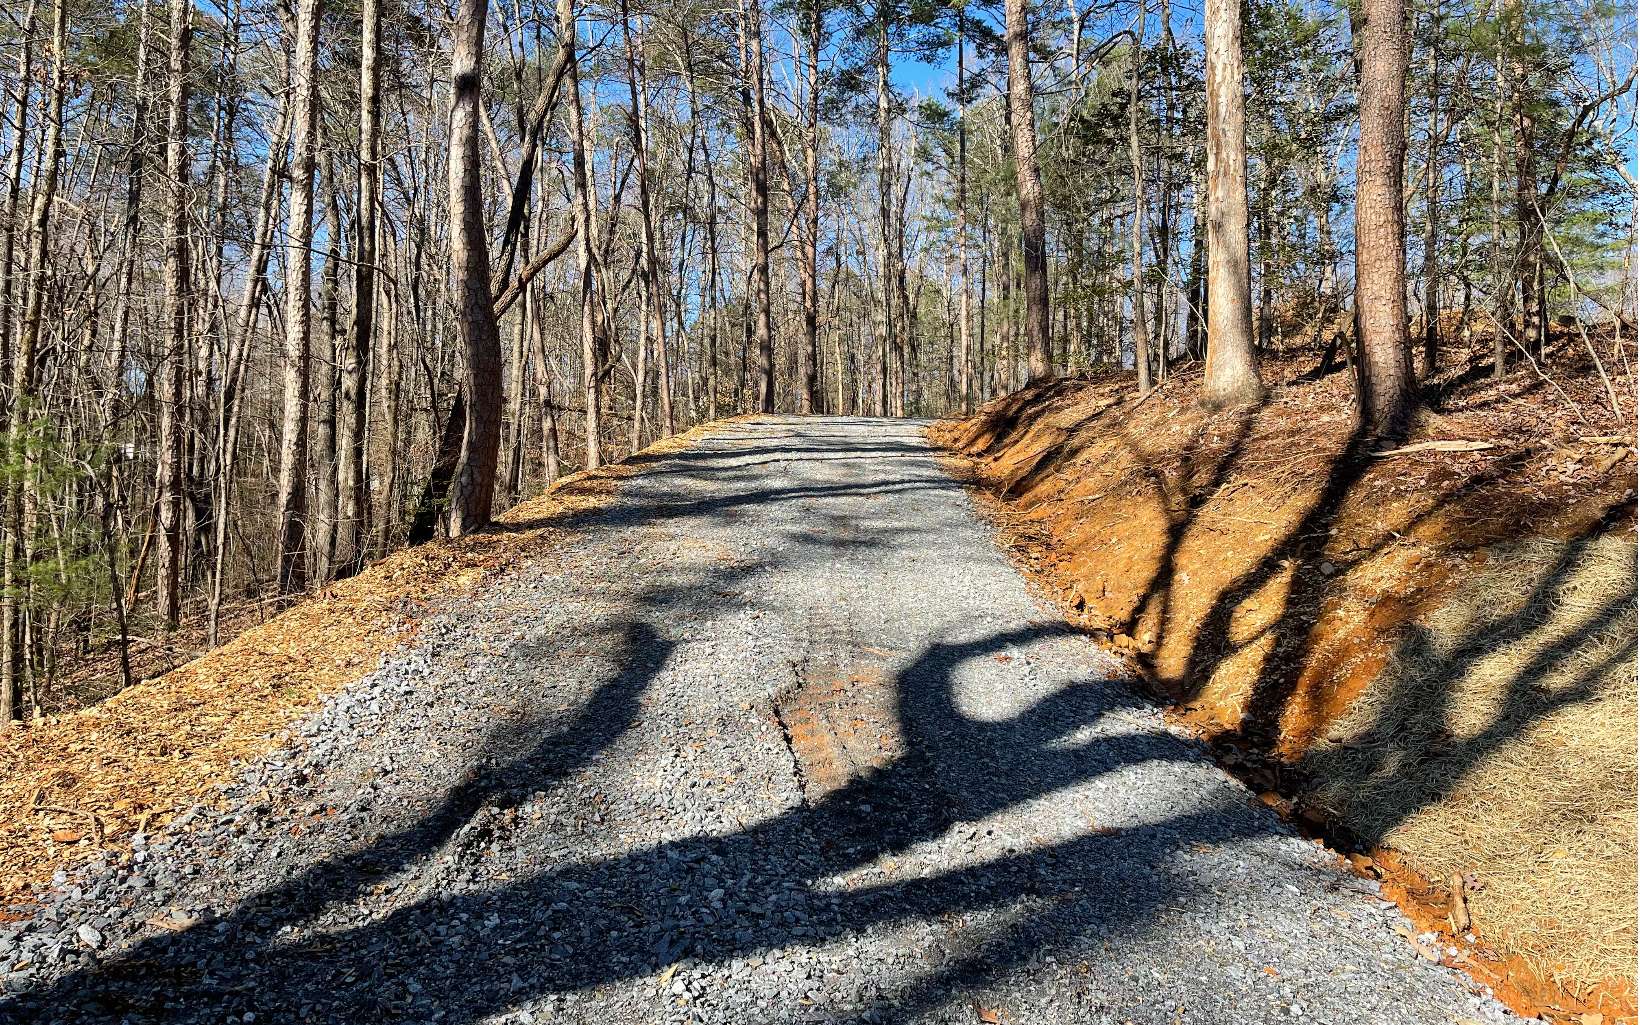 Beautiful 3.04 acres in the quiet community of Hidden Hills with driveway, 3 bedroom septic and grading already taken care of. This lot is wooded and close to hwy 515 and all the shopping centers in Ellijay. Developer has graveled the driveway and mulched the sides to prevent erosion issues, just bring your builder and house plans and get to work!